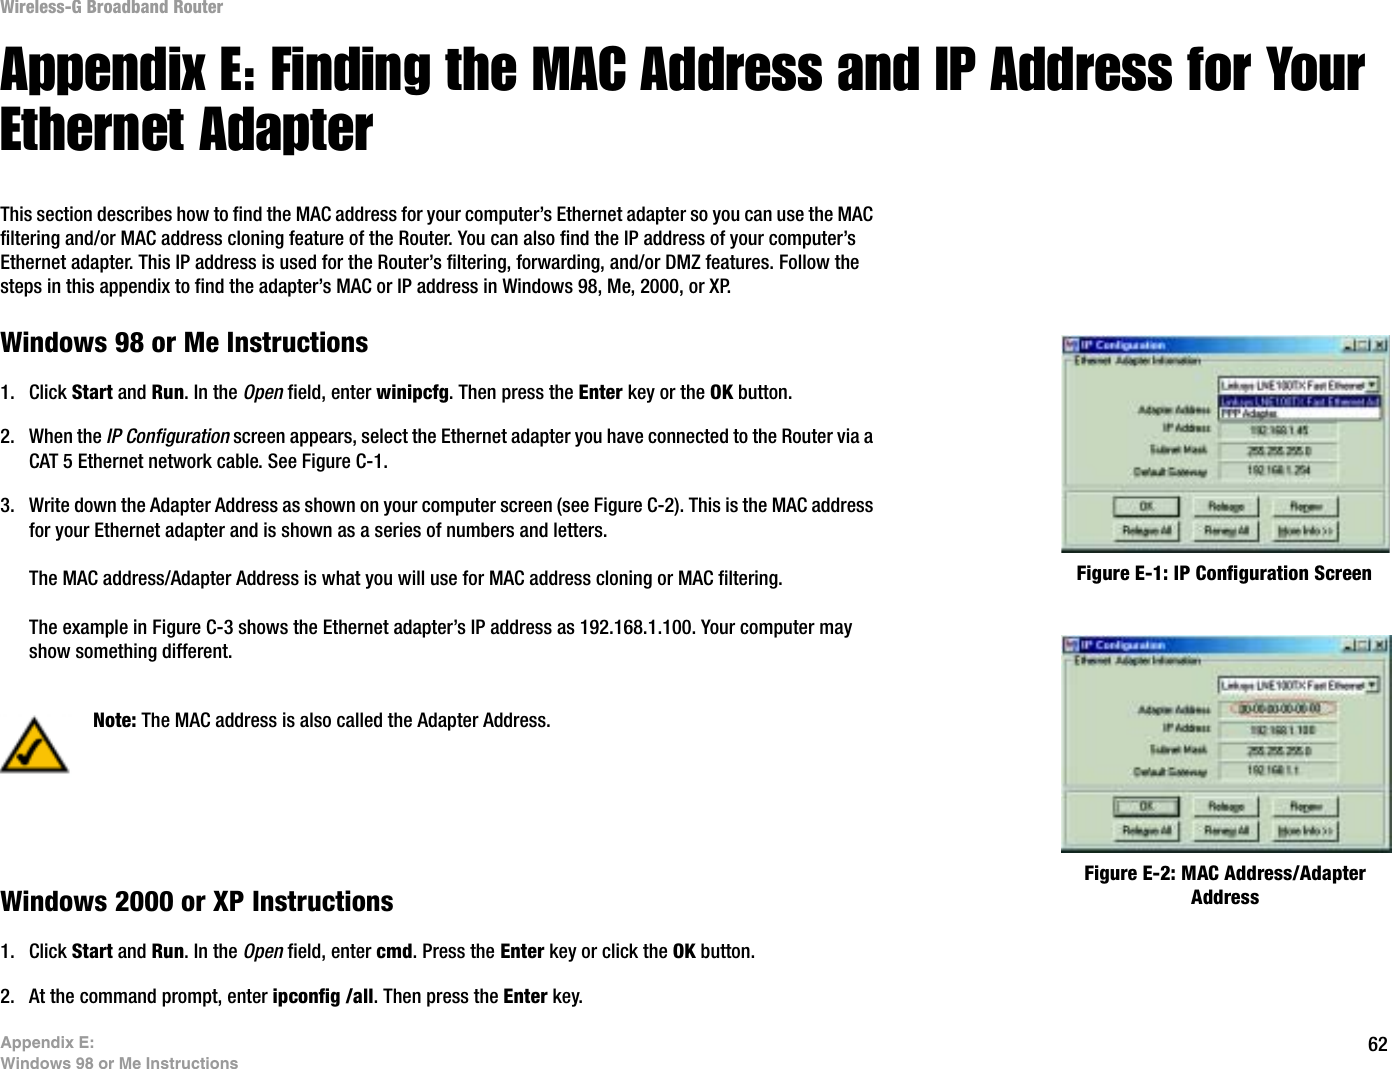 62Appendix E: Windows 98 or Me InstructionsWireless-G Broadband RouterAppendix E: Finding the MAC Address and IP Address for Your Ethernet AdapterThis section describes how to find the MAC address for your computer’s Ethernet adapter so you can use the MAC filtering and/or MAC address cloning feature of the Router. You can also find the IP address of your computer’s Ethernet adapter. This IP address is used for the Router’s filtering, forwarding, and/or DMZ features. Follow the steps in this appendix to find the adapter’s MAC or IP address in Windows 98, Me, 2000, or XP.Windows 98 or Me Instructions1. Click Start and Run. In the Open field, enter winipcfg. Then press the Enter key or the OK button. 2. When the IP Configuration screen appears, select the Ethernet adapter you have connected to the Router via a CAT 5 Ethernet network cable. See Figure C-1.3. Write down the Adapter Address as shown on your computer screen (see Figure C-2). This is the MAC address for your Ethernet adapter and is shown as a series of numbers and letters.The MAC address/Adapter Address is what you will use for MAC address cloning or MAC filtering.The example in Figure C-3 shows the Ethernet adapter’s IP address as 192.168.1.100. Your computer may show something different.Windows 2000 or XP Instructions1. Click Start and Run. In the Open field, enter cmd. Press the Enter key or click the OK button.2. At the command prompt, enter ipconfig /all. Then press the Enter key.Figure E-2: MAC Address/Adapter AddressFigure E-1: IP Configuration ScreenNote: The MAC address is also called the Adapter Address.